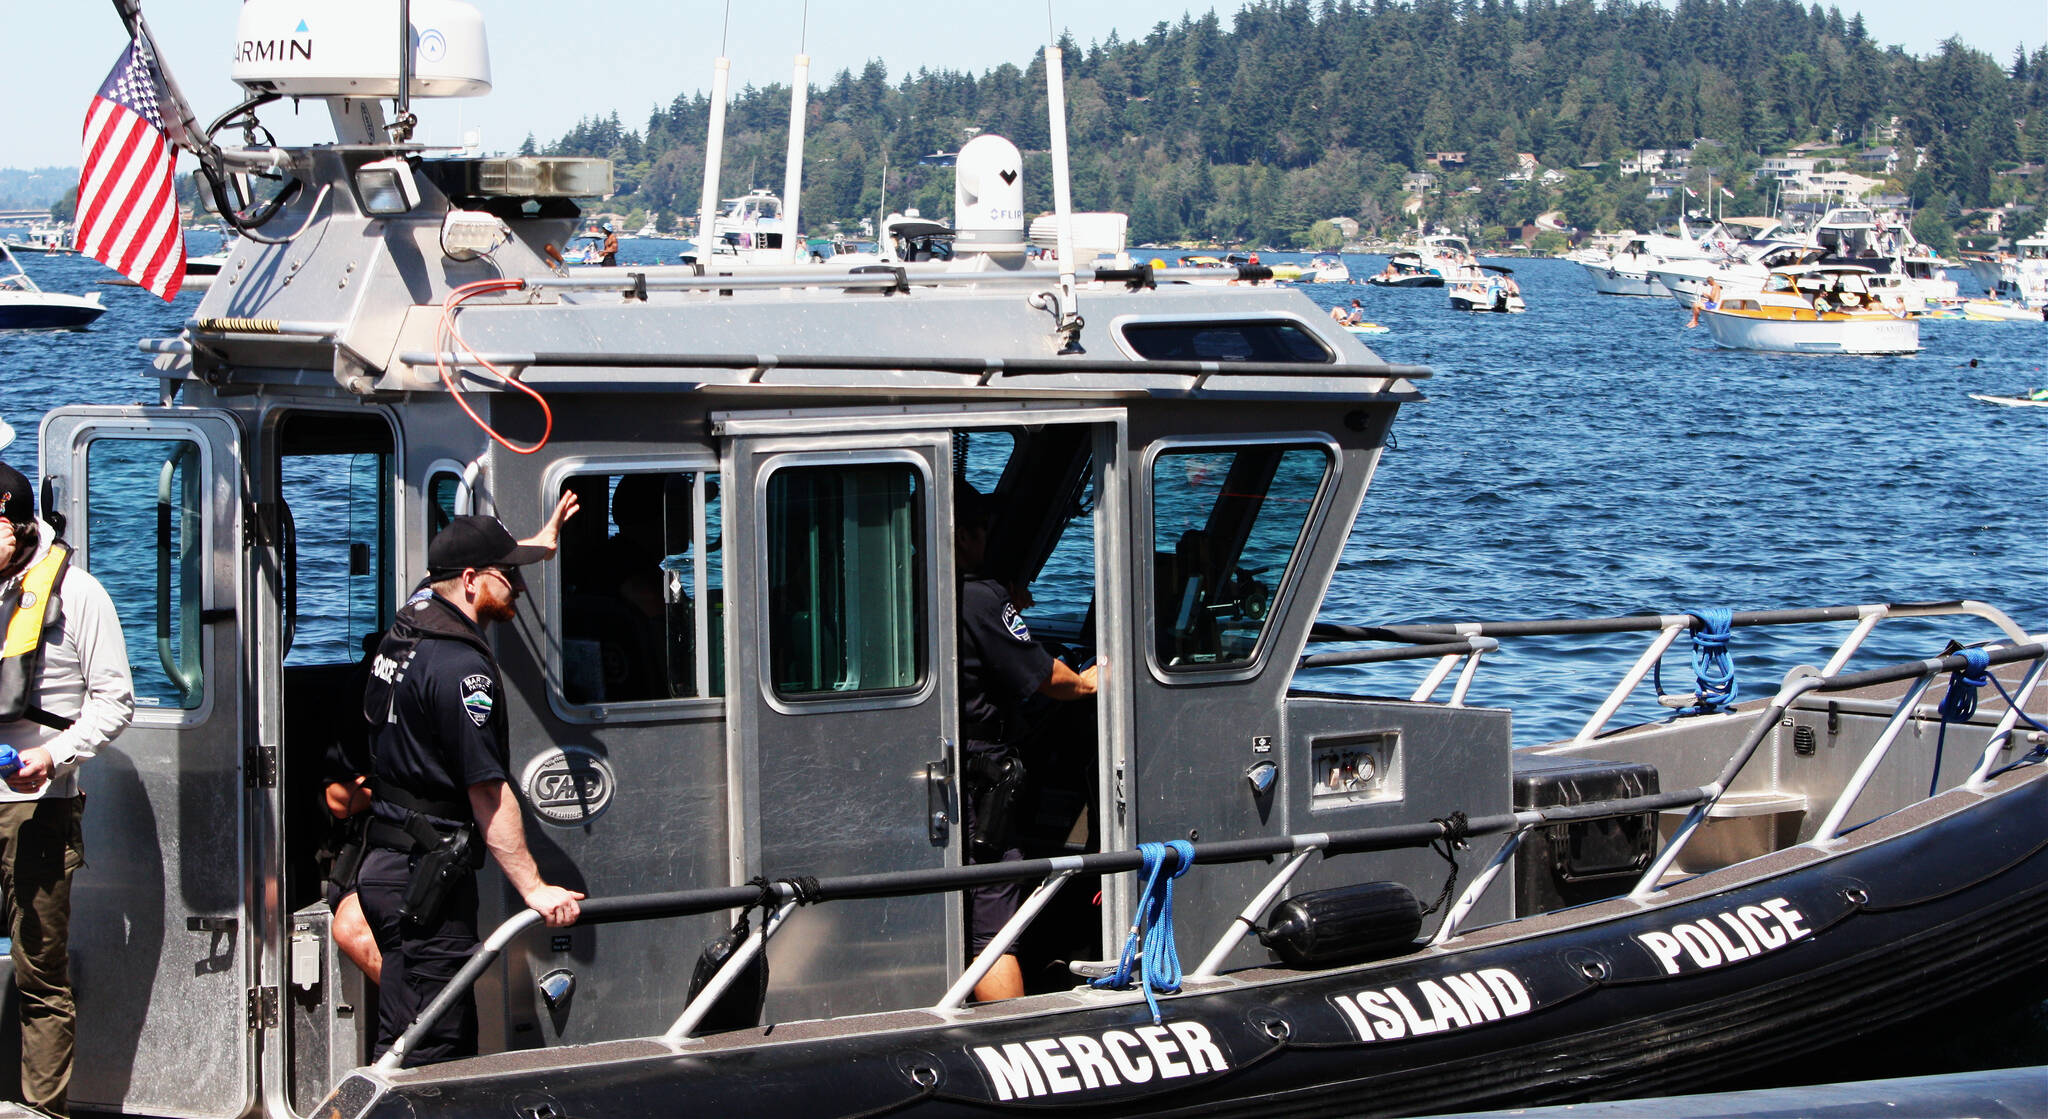 Mercer Island Police Department Marine Patrol officers survey the scene on Lake Washington during Seafair on Aug. 7, 2022. Andy Nystrom/ staff photo